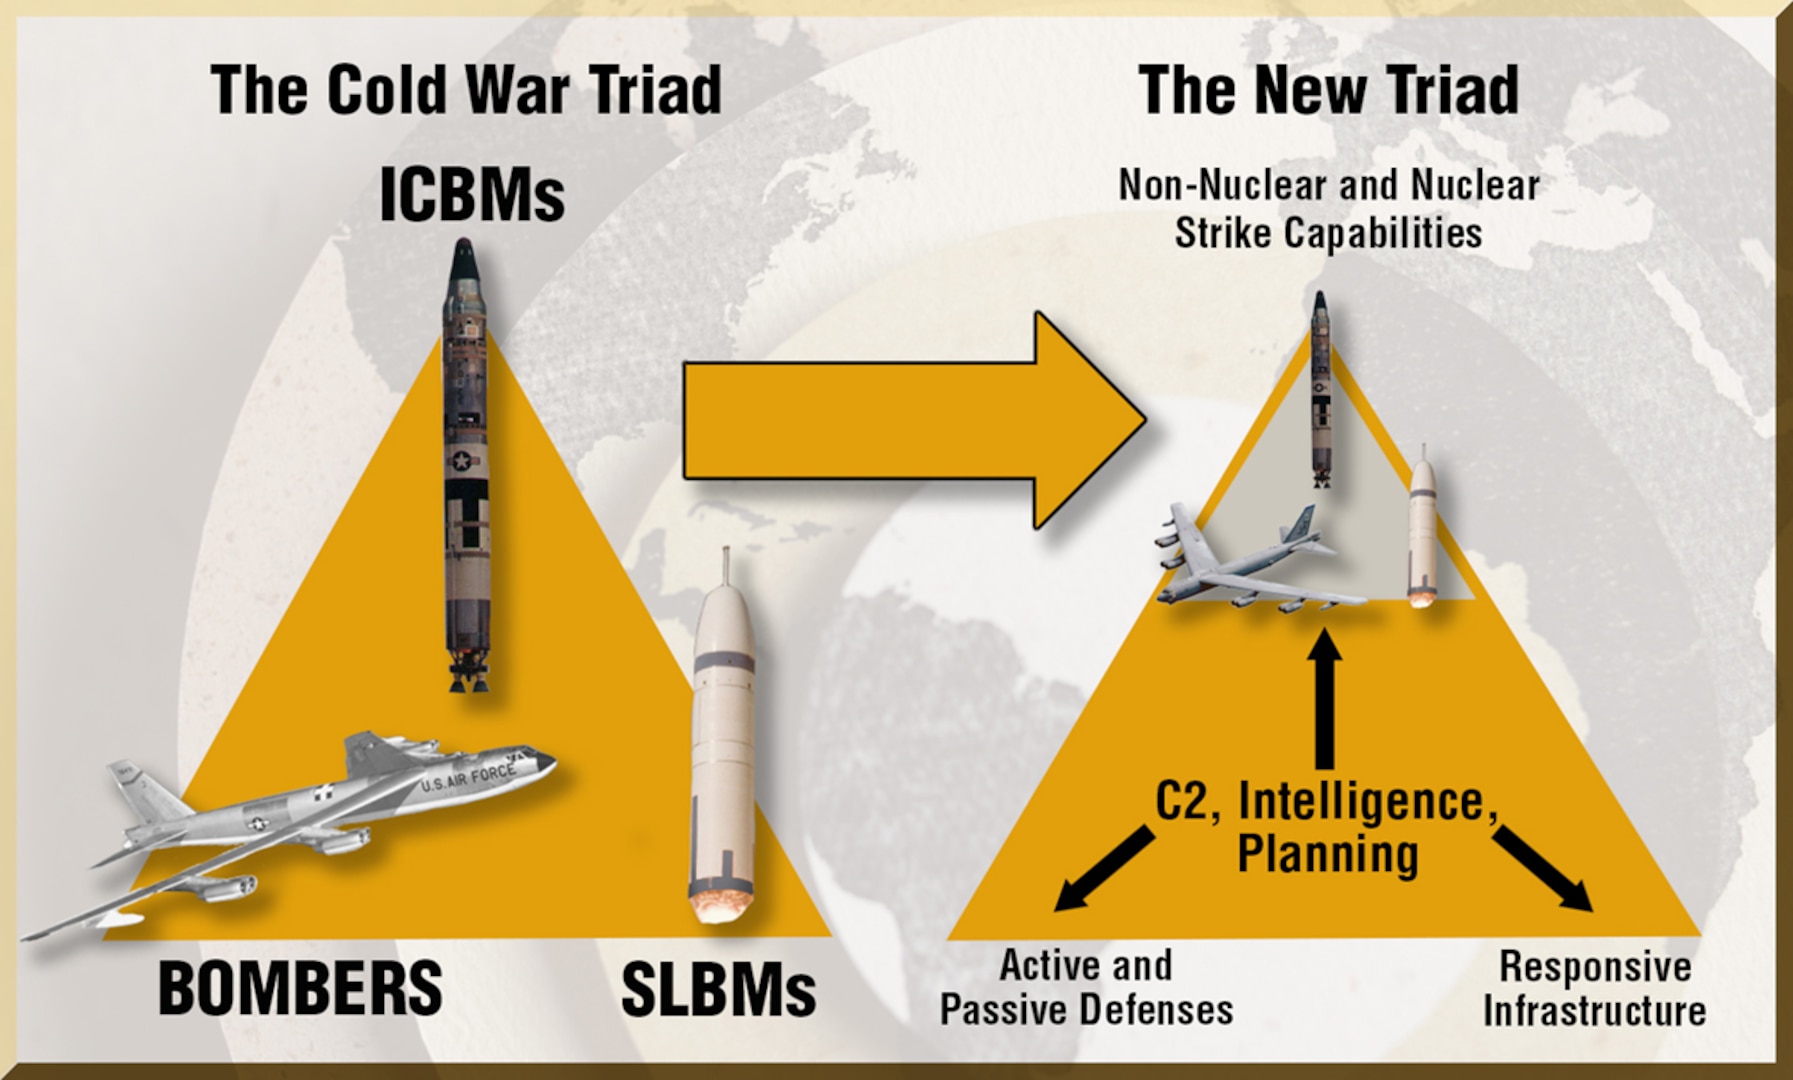 The Cold War Nuclear Triad has evolved to a more “capabilities-based” posture to deal with multiple aggressors across a spectrum of contingencies.